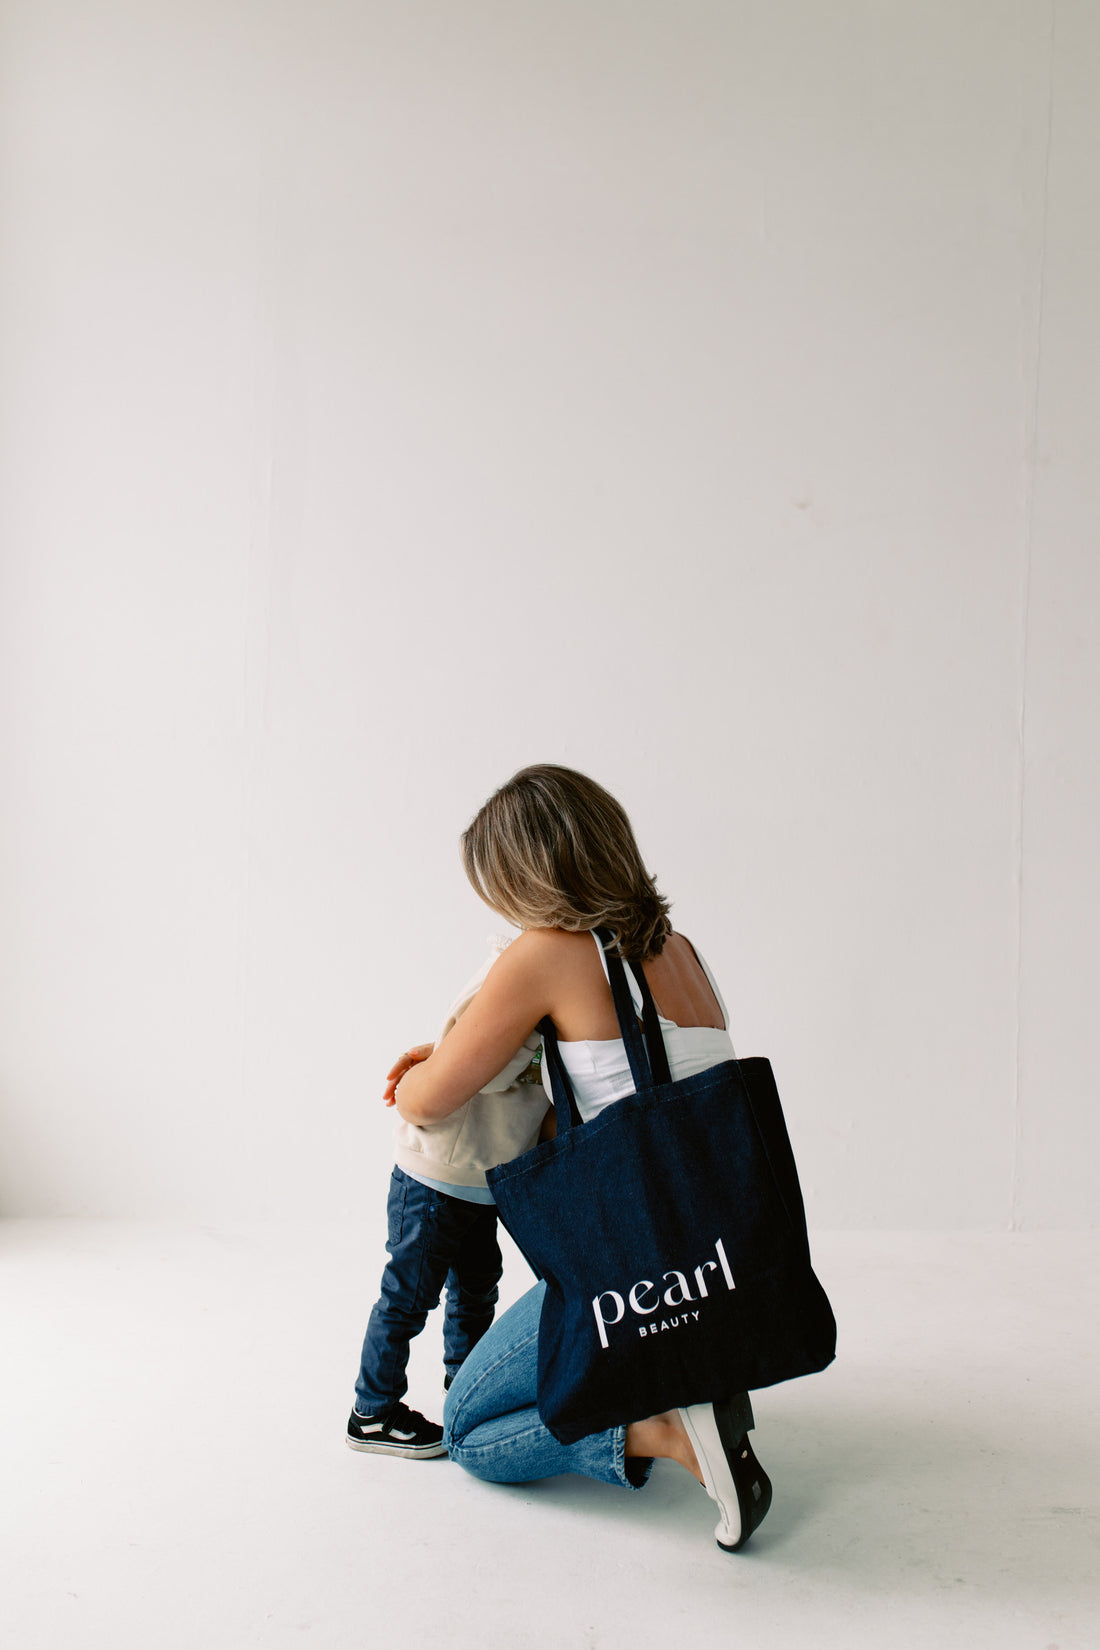 The One Pearl Beauty Tote Bag